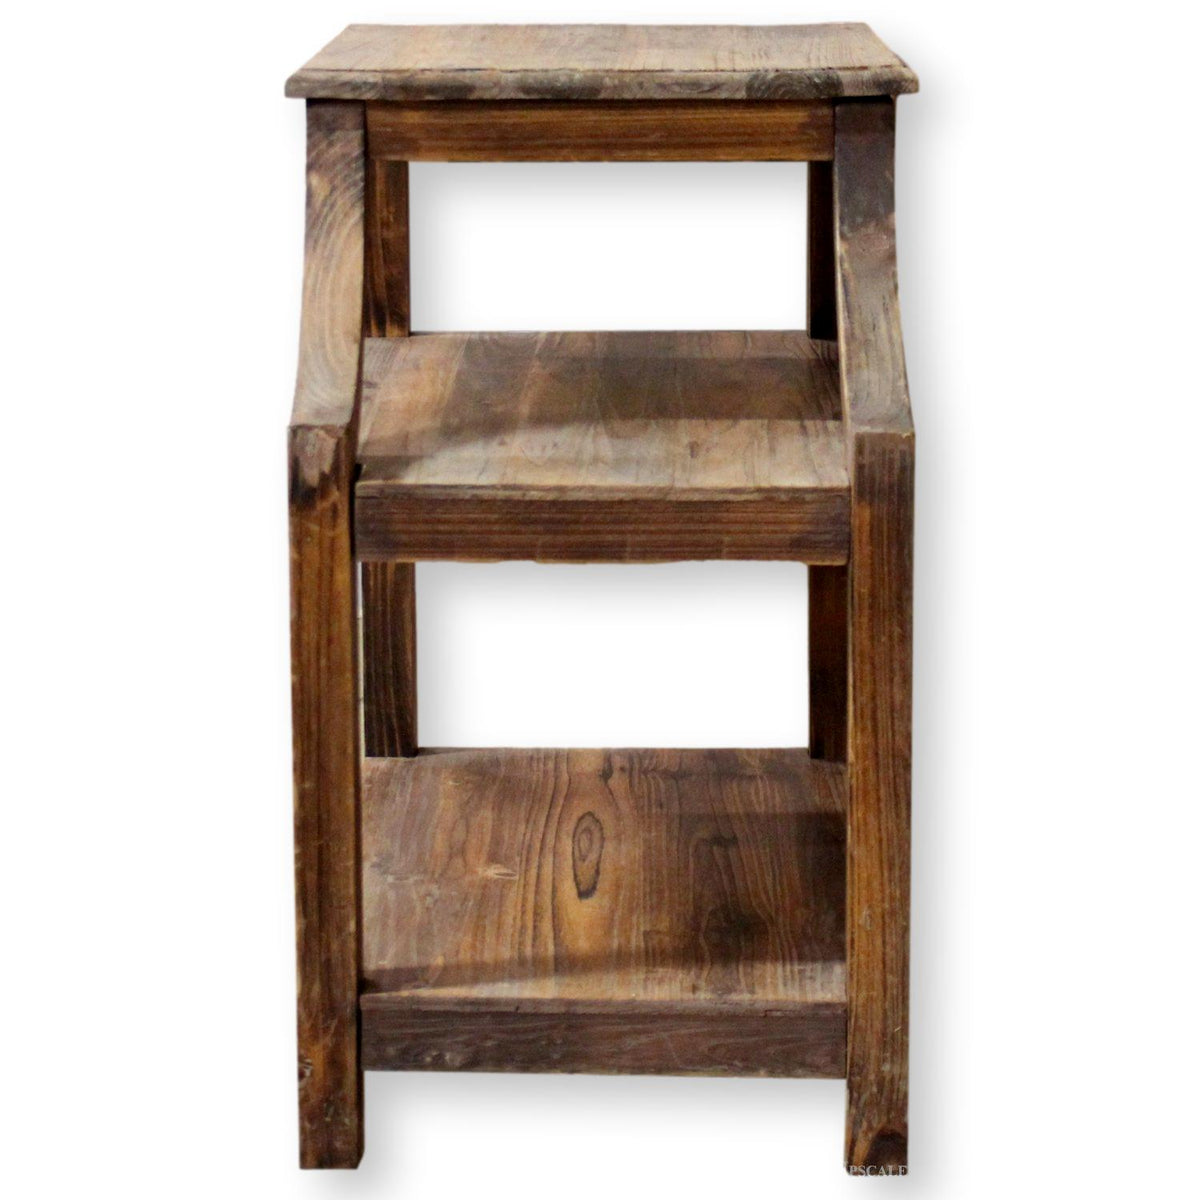 Rustic Three-Tiered Side Table